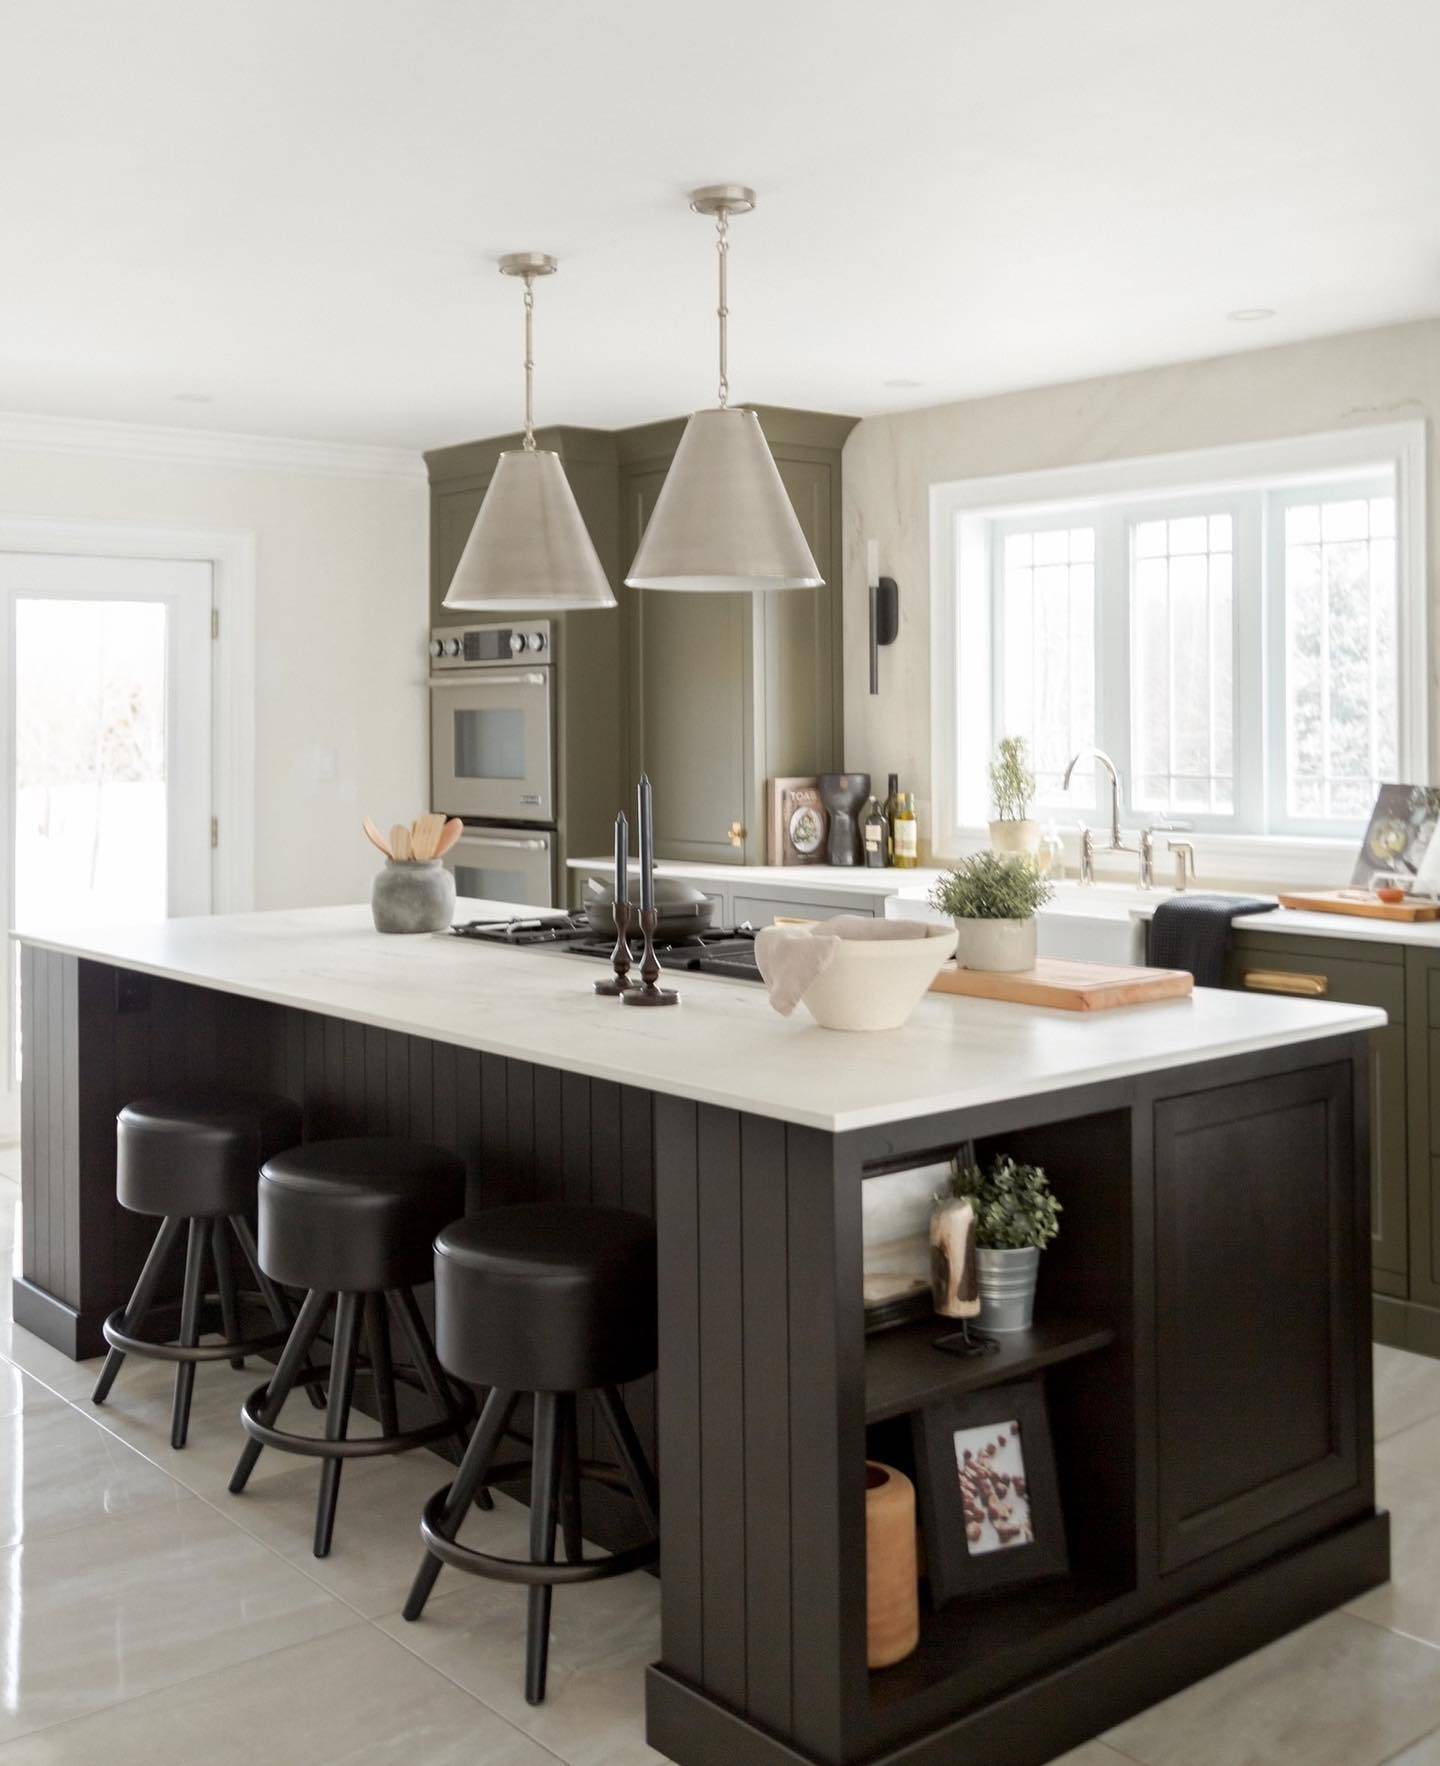 green kitchen cupboards with black island hanging pendants